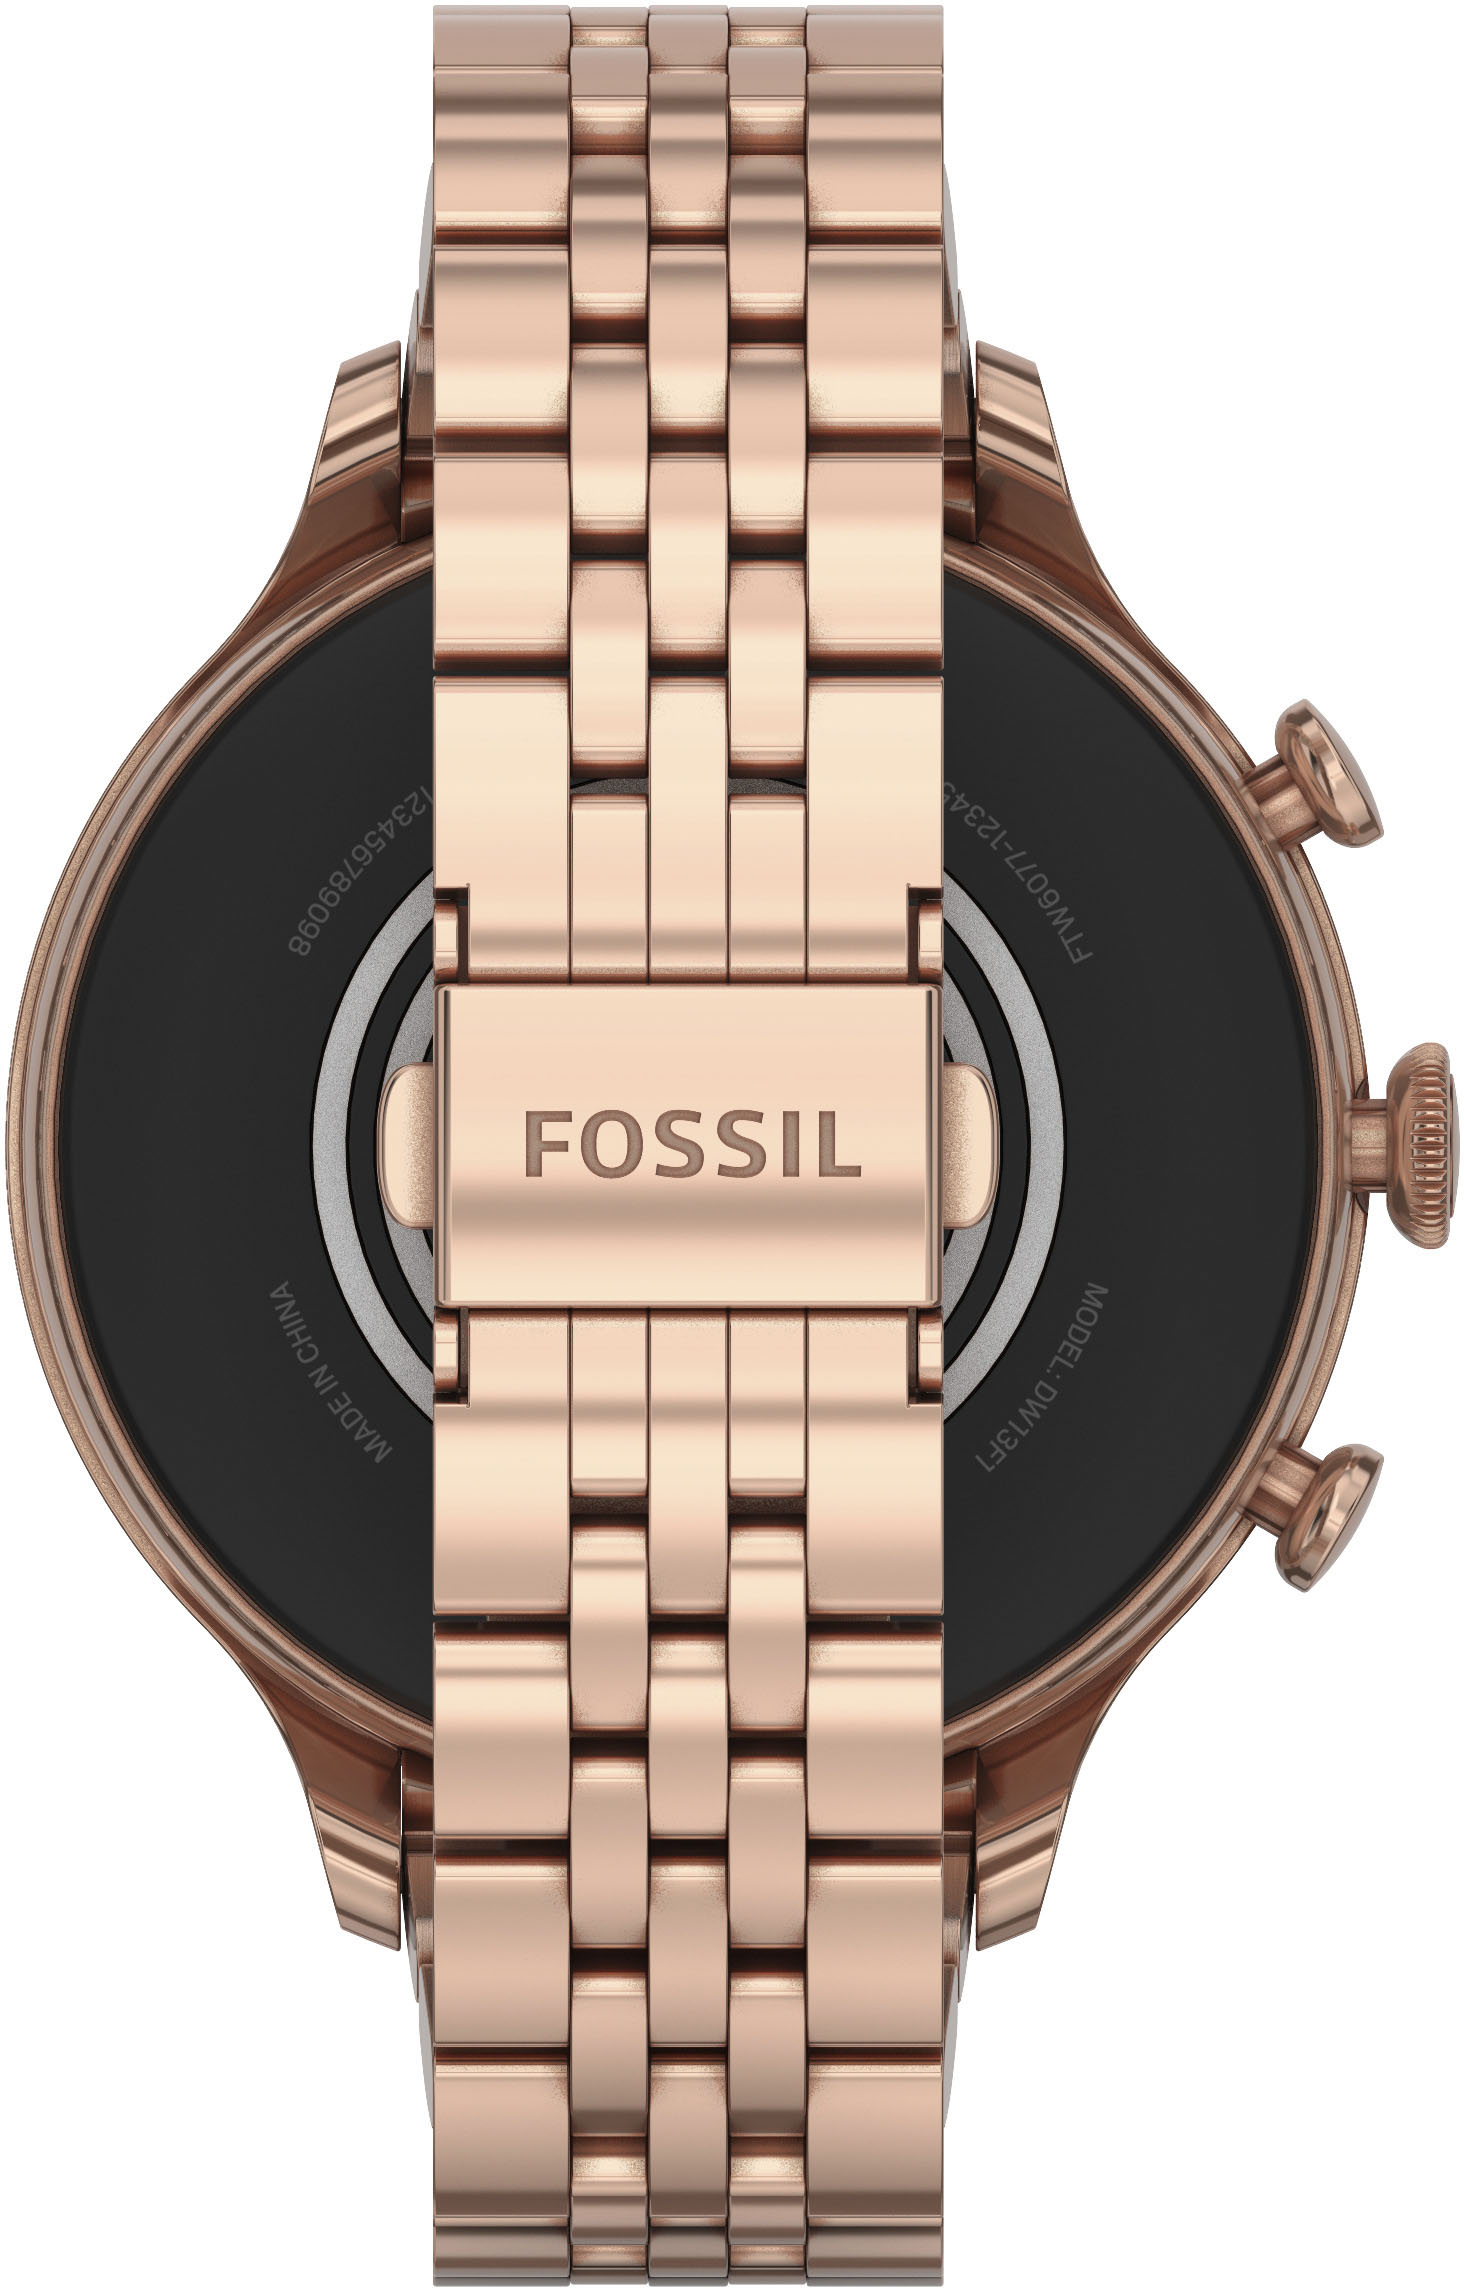 Angle View: Fossil - Gen 5 Smartwatch 44mm Stainless Steel - Smoke with Smoke Stainless Steel Band